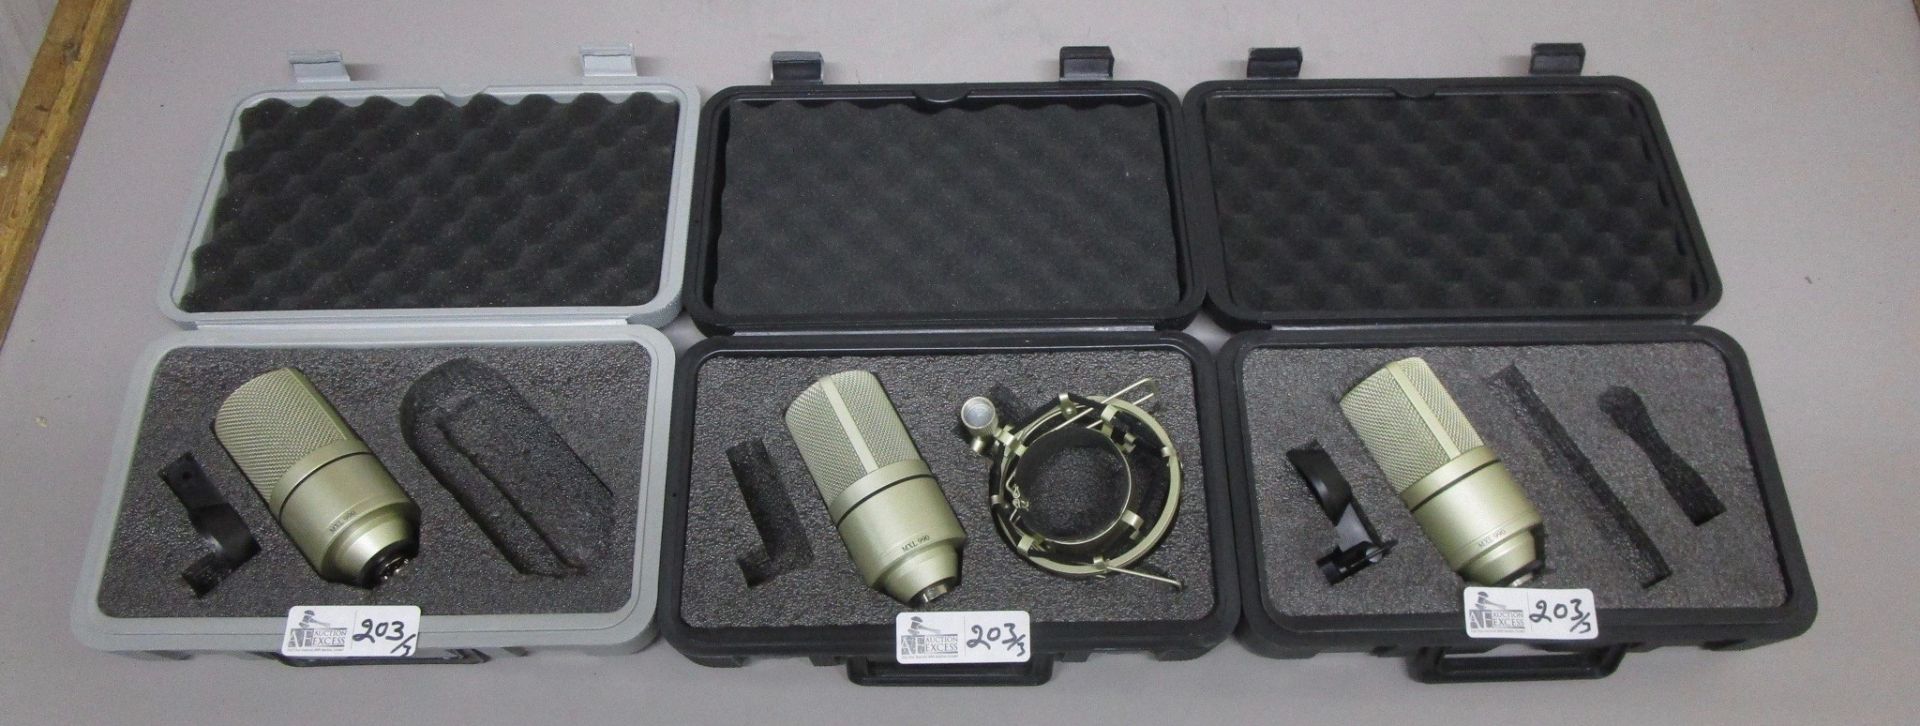 LOT OF 3 MXL 990 MICS IN CARRY CASES